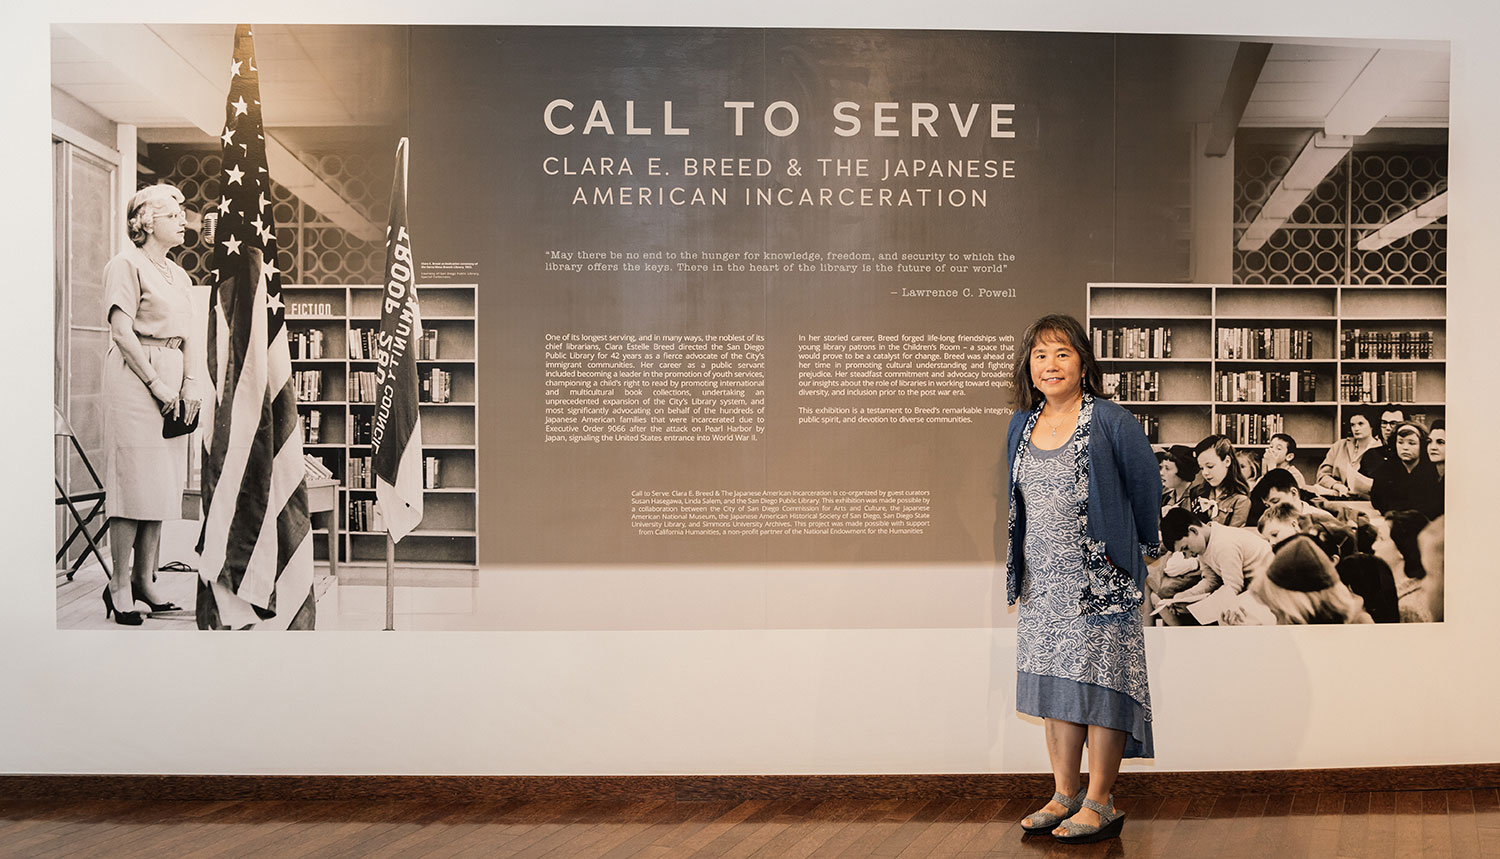 Susan Hasegawa stands in front of a mural that describes the incarceration of Japanese Americans during World War Two